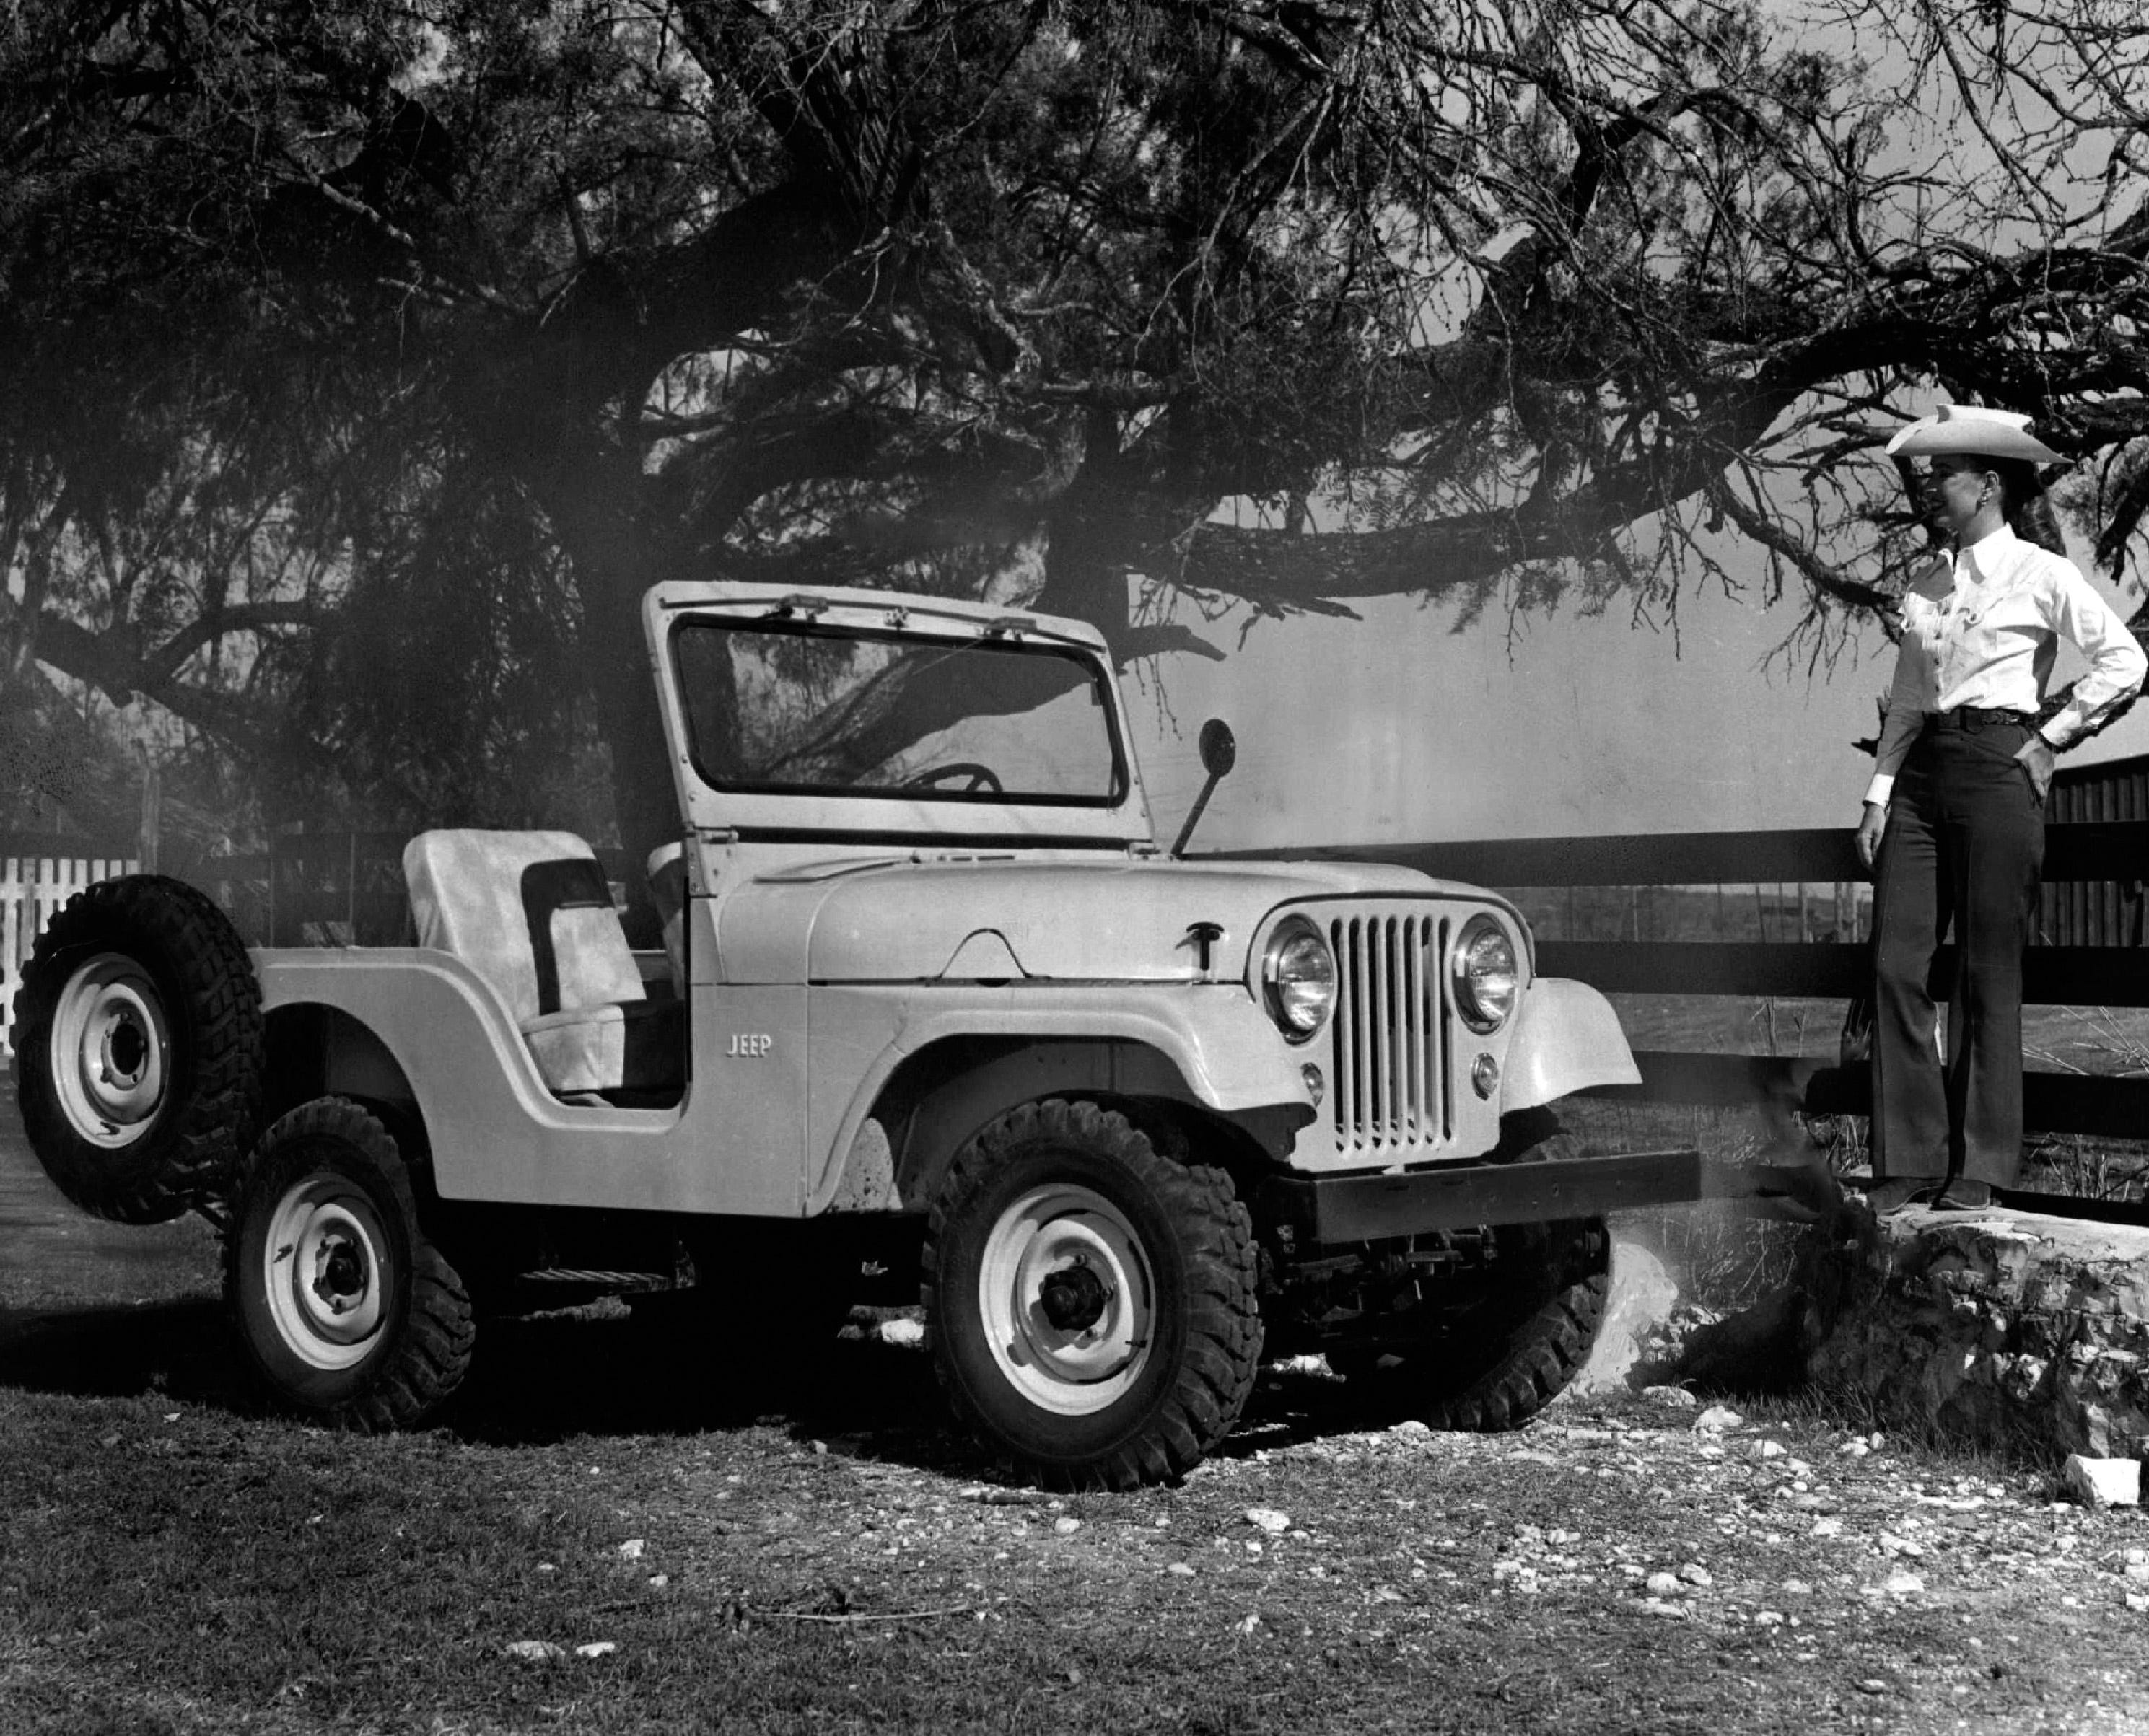 The '55 Civilian Jeep. A new version of the famed Willys Overland Models jeep, known as Model CJ-5. The vehicle was powered by the 75 horsepower Willys engine in combination with four-wheel drive.